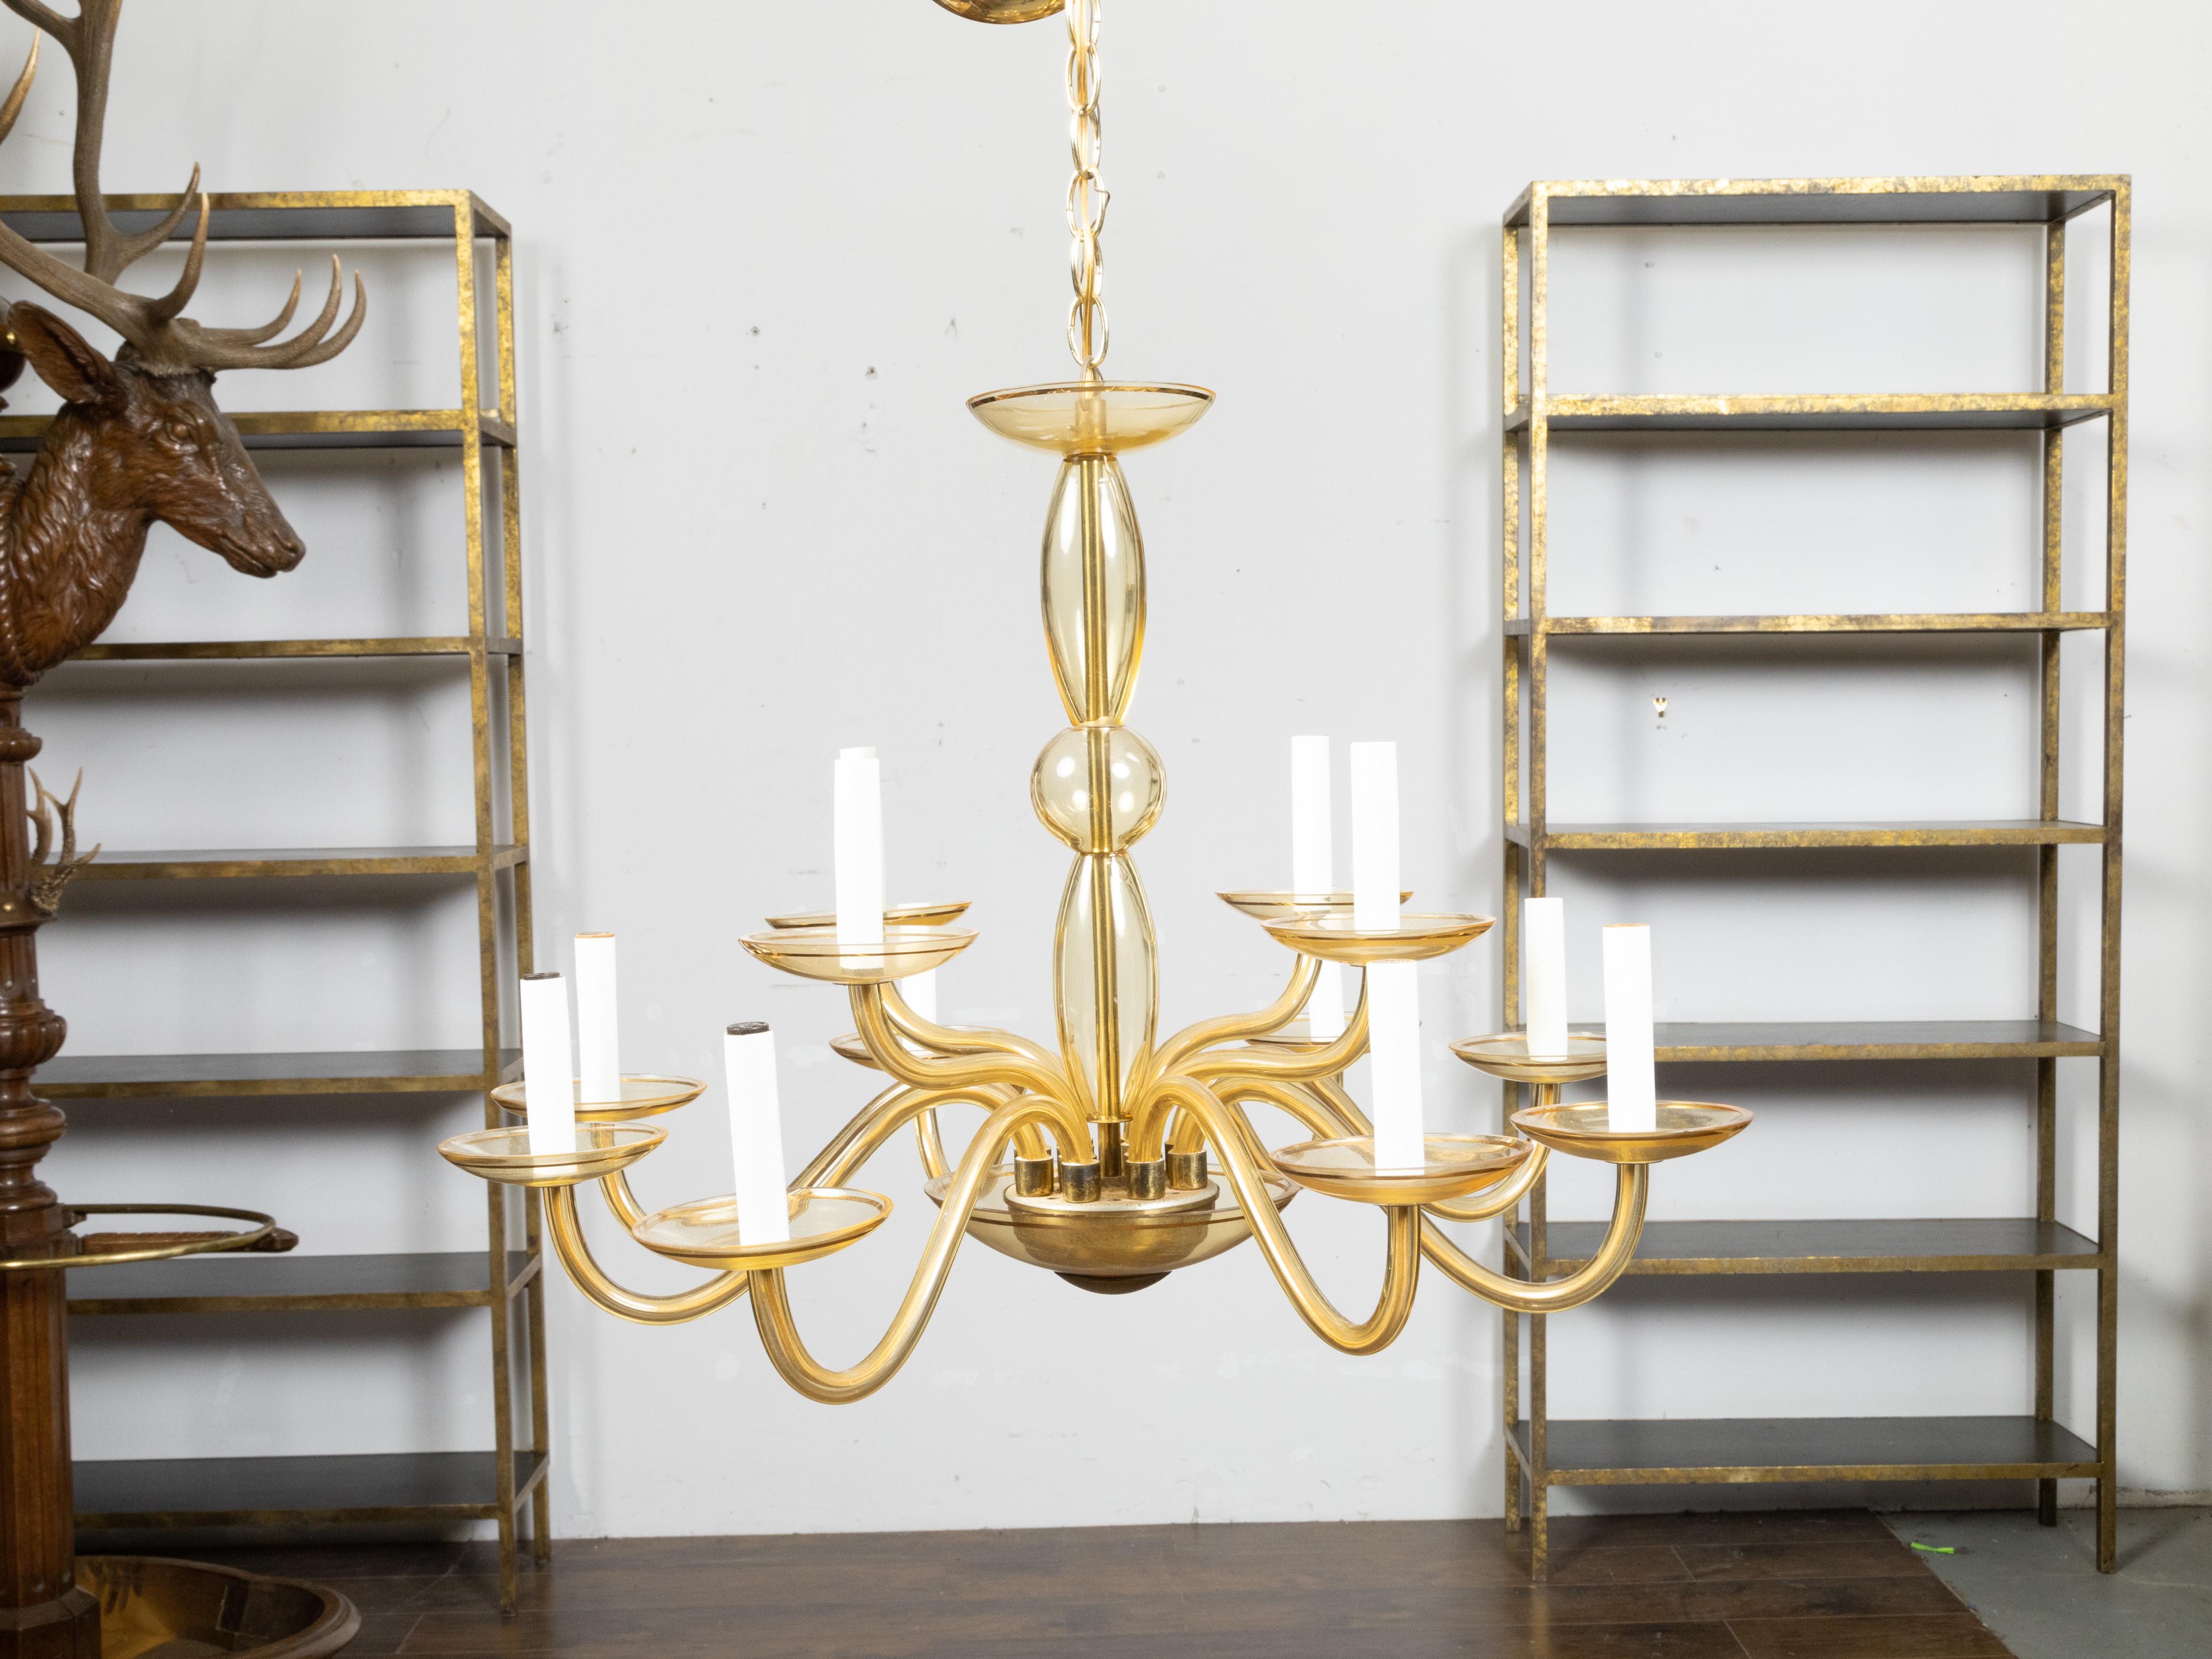 An Italian Murano glass chandelier from the mid 20th century with 12 lights and golden tones. Created on the island of Murano in Italy during the Midcentury period, this hand-blown glass chandelier features a central column connected to a lower